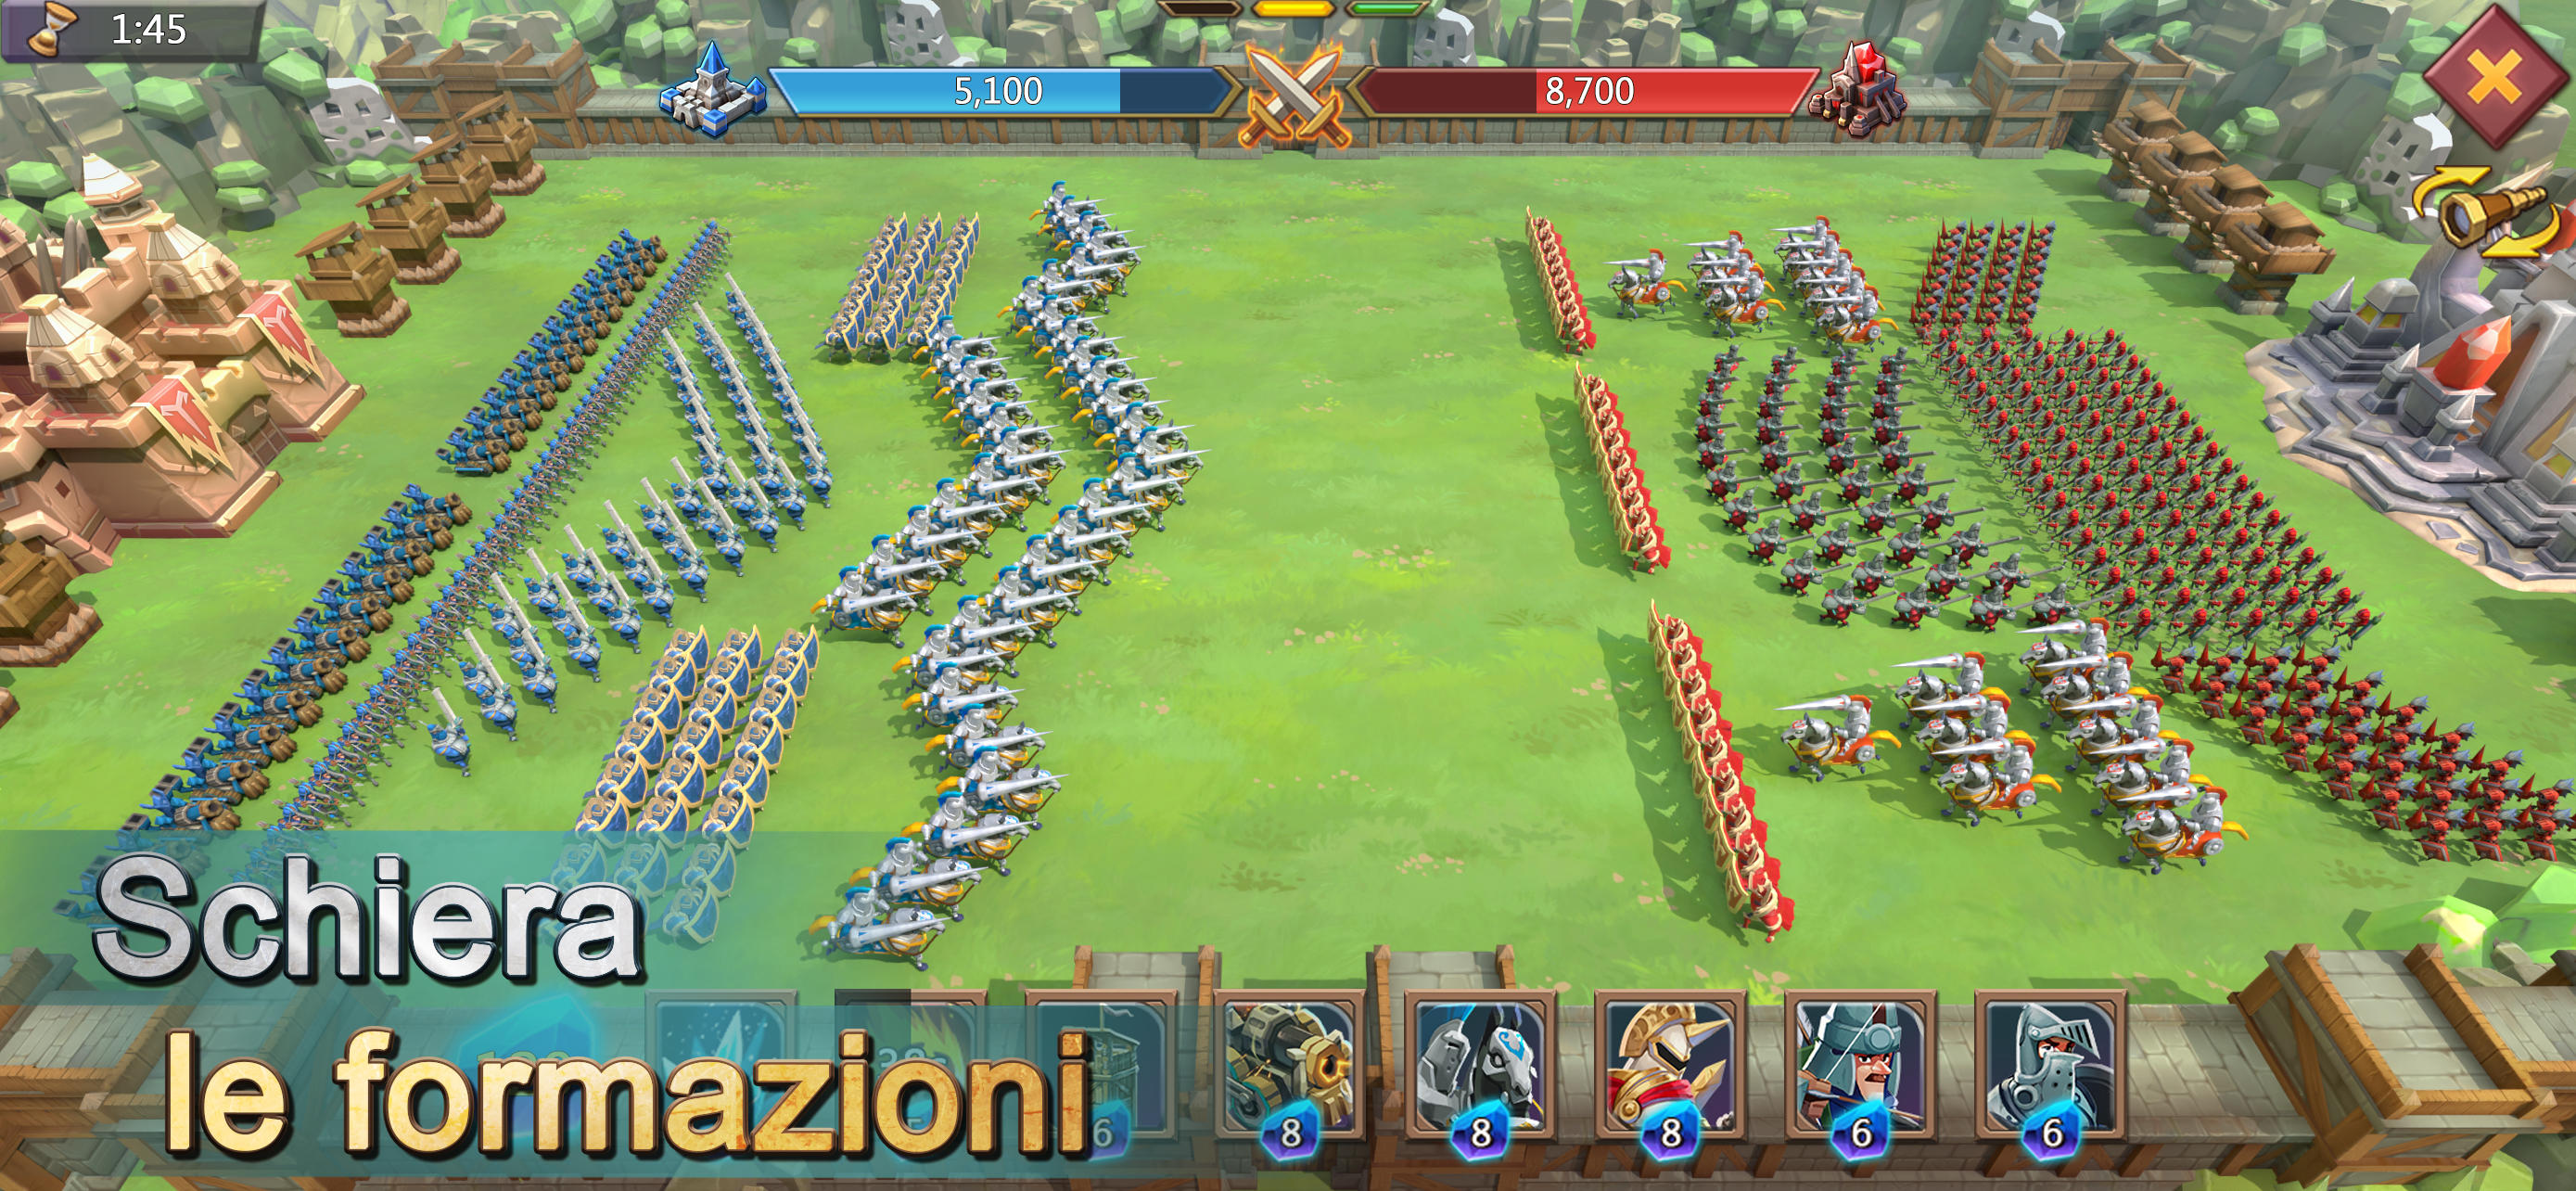 Screenshot 1 of Lords Mobile: Tower Defense 2.129